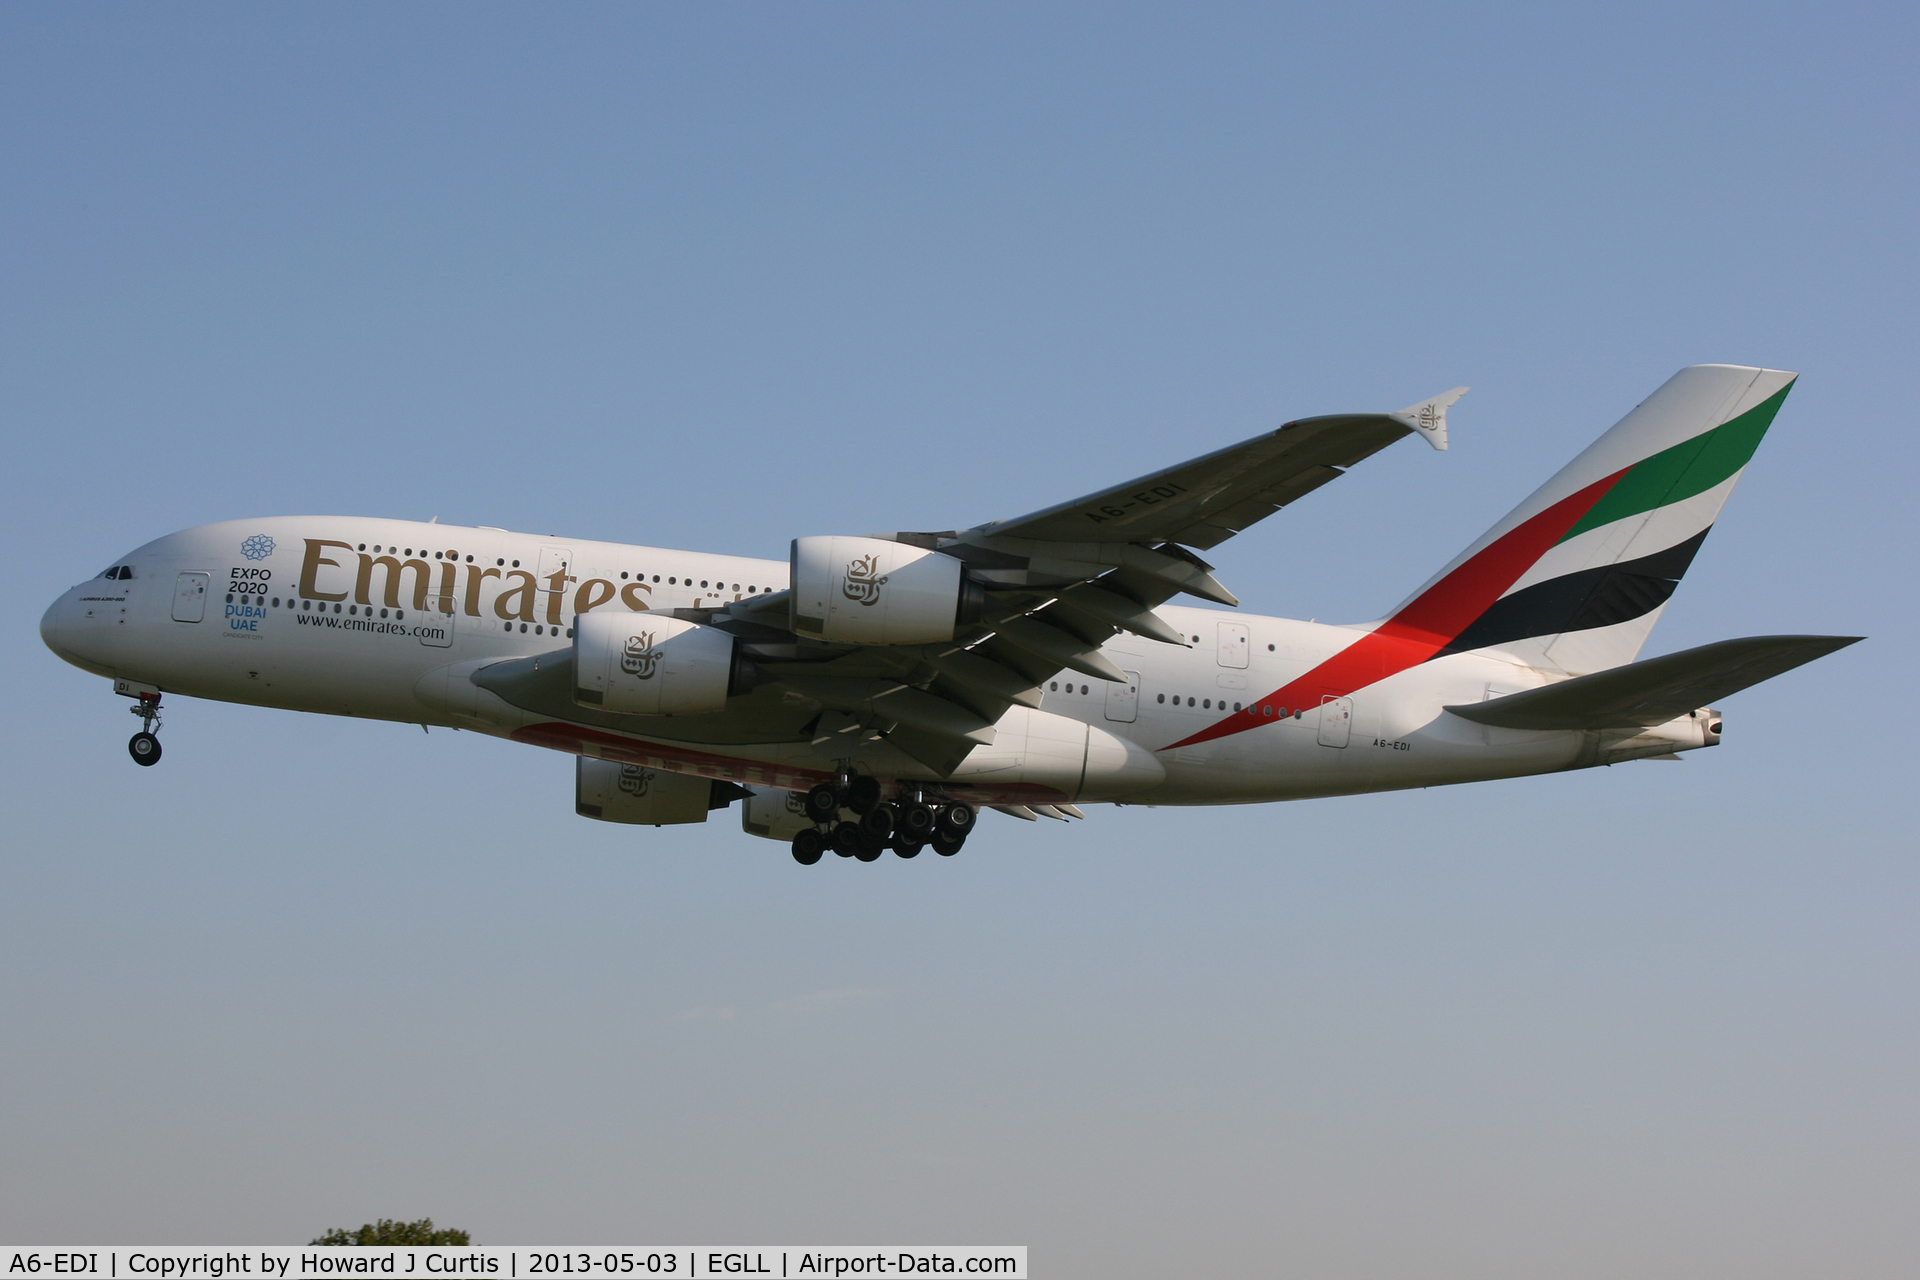 A6-EDI, 2009 Airbus A380-861 C/N 028, Emirates. On approach to runway 27L.